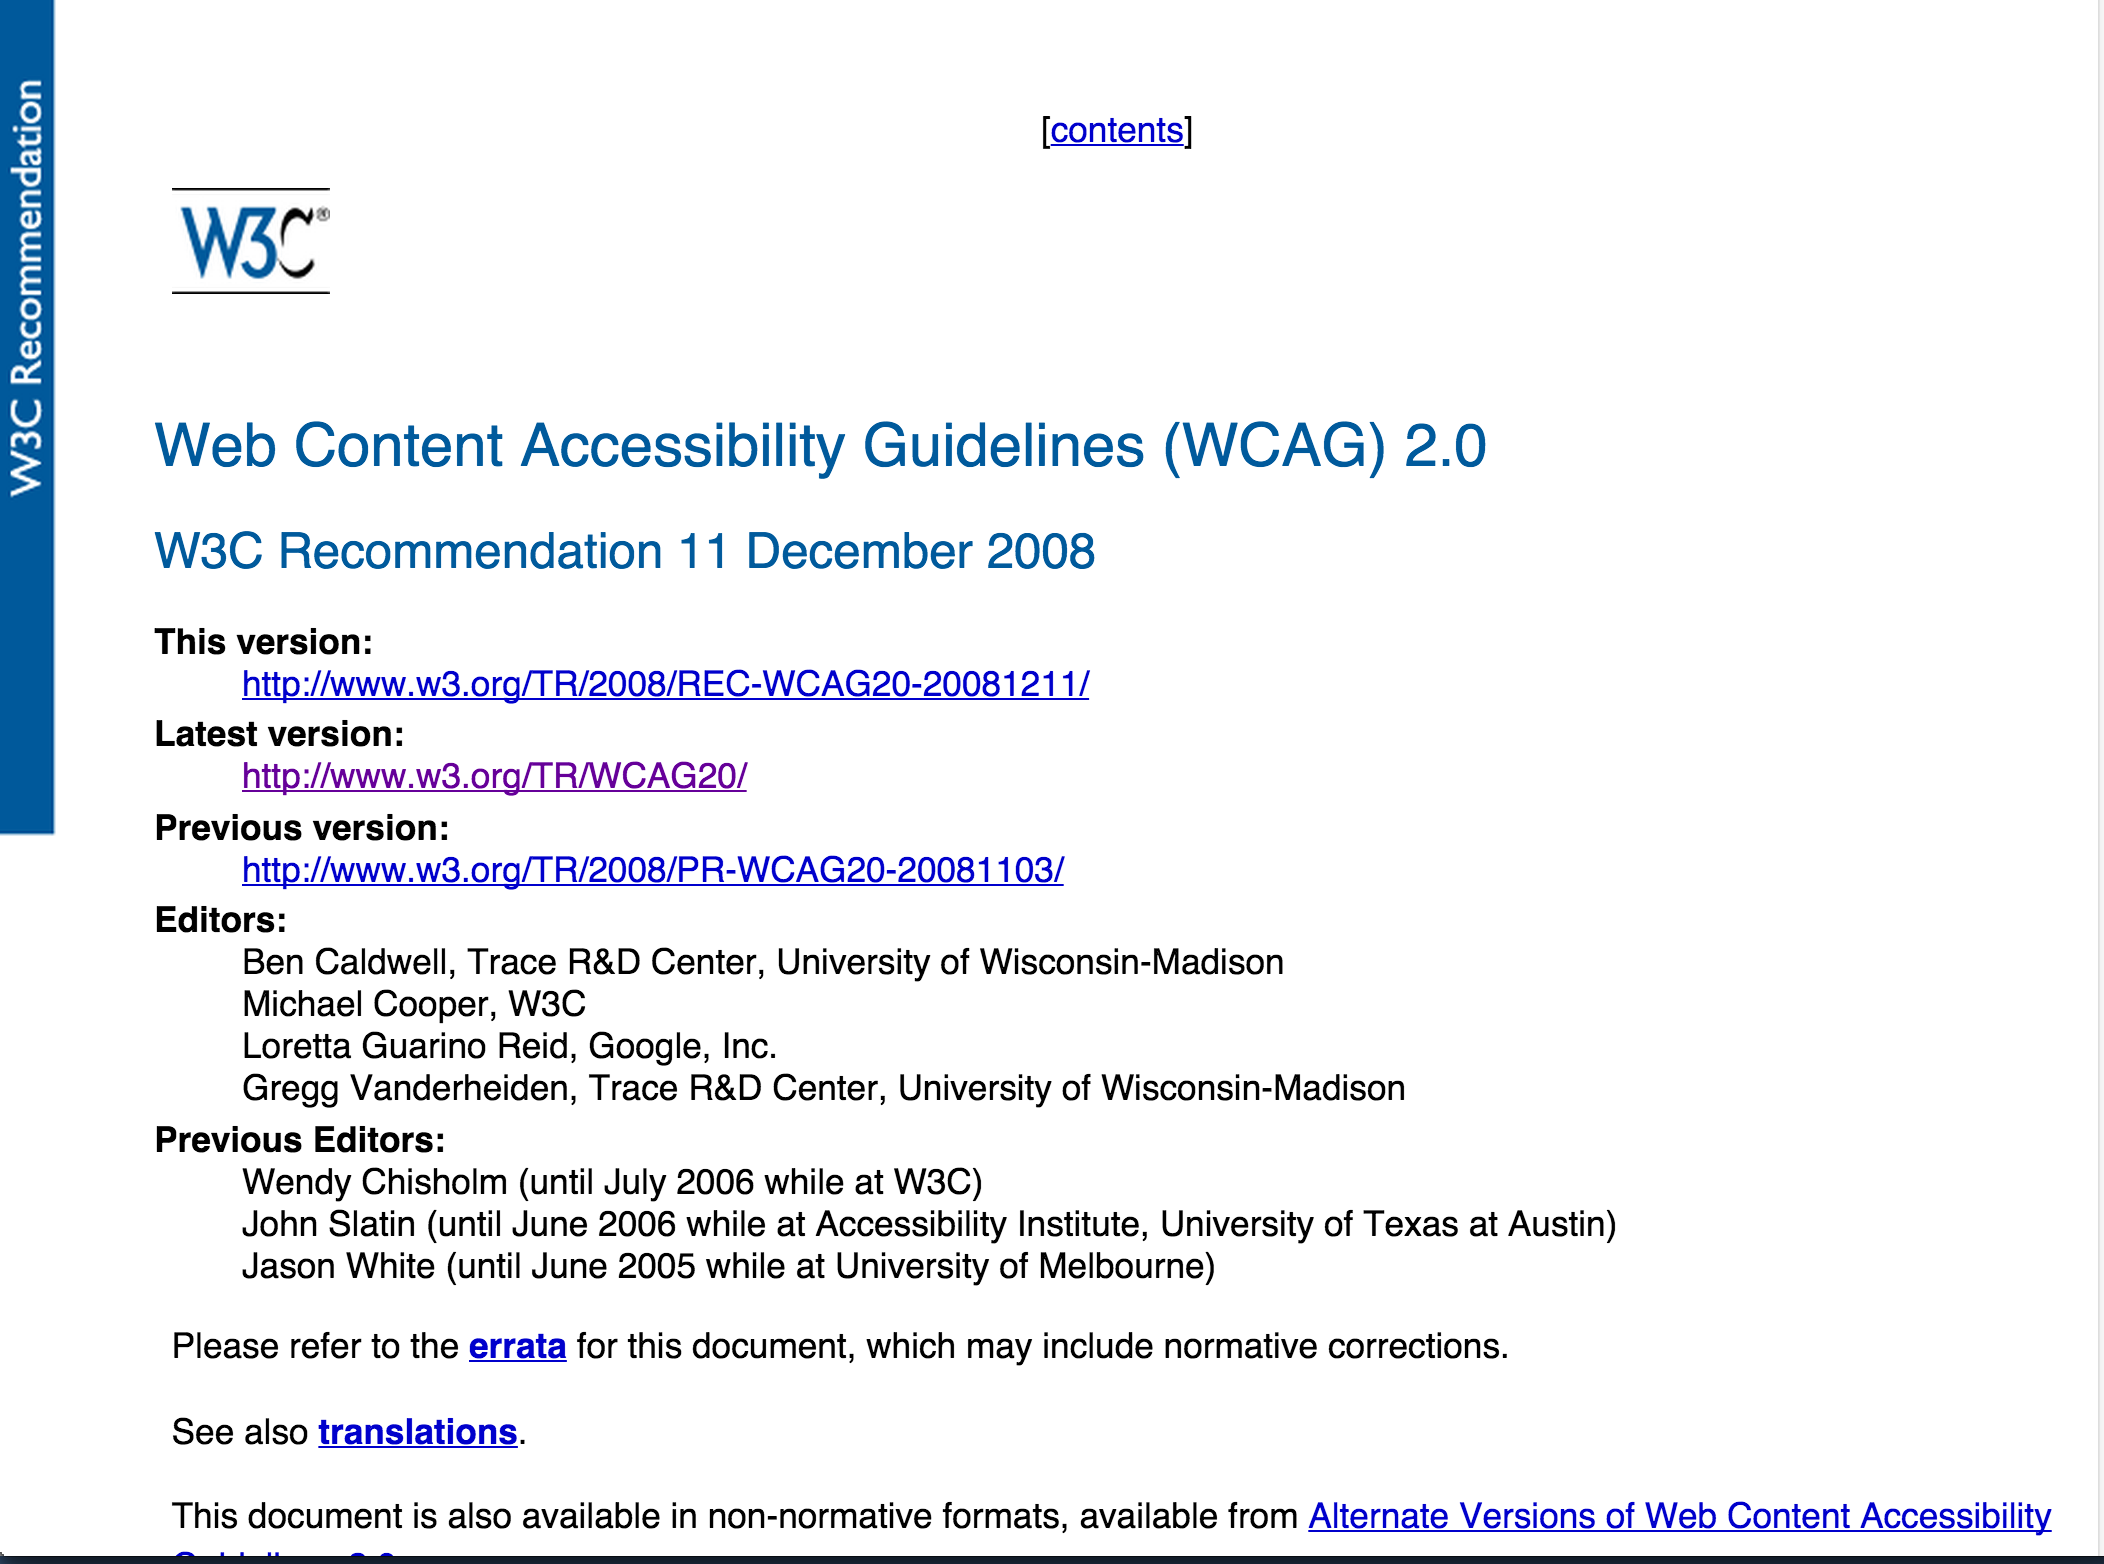 Graphical browser rendering of title portion of WCAG 2.0 Guidelines